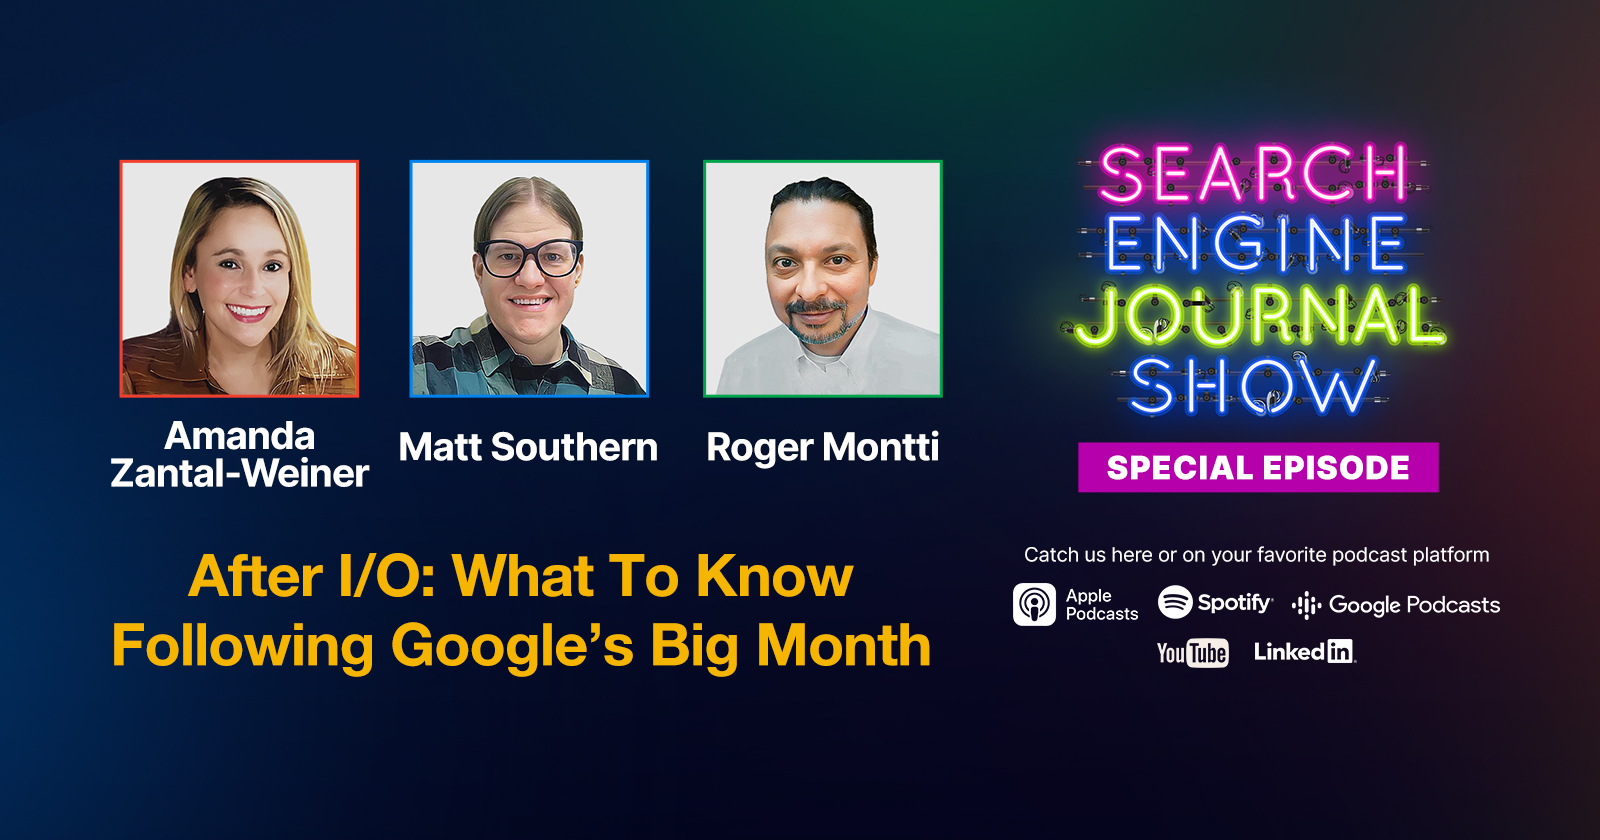 What you should know after the big Google month [Podcast]